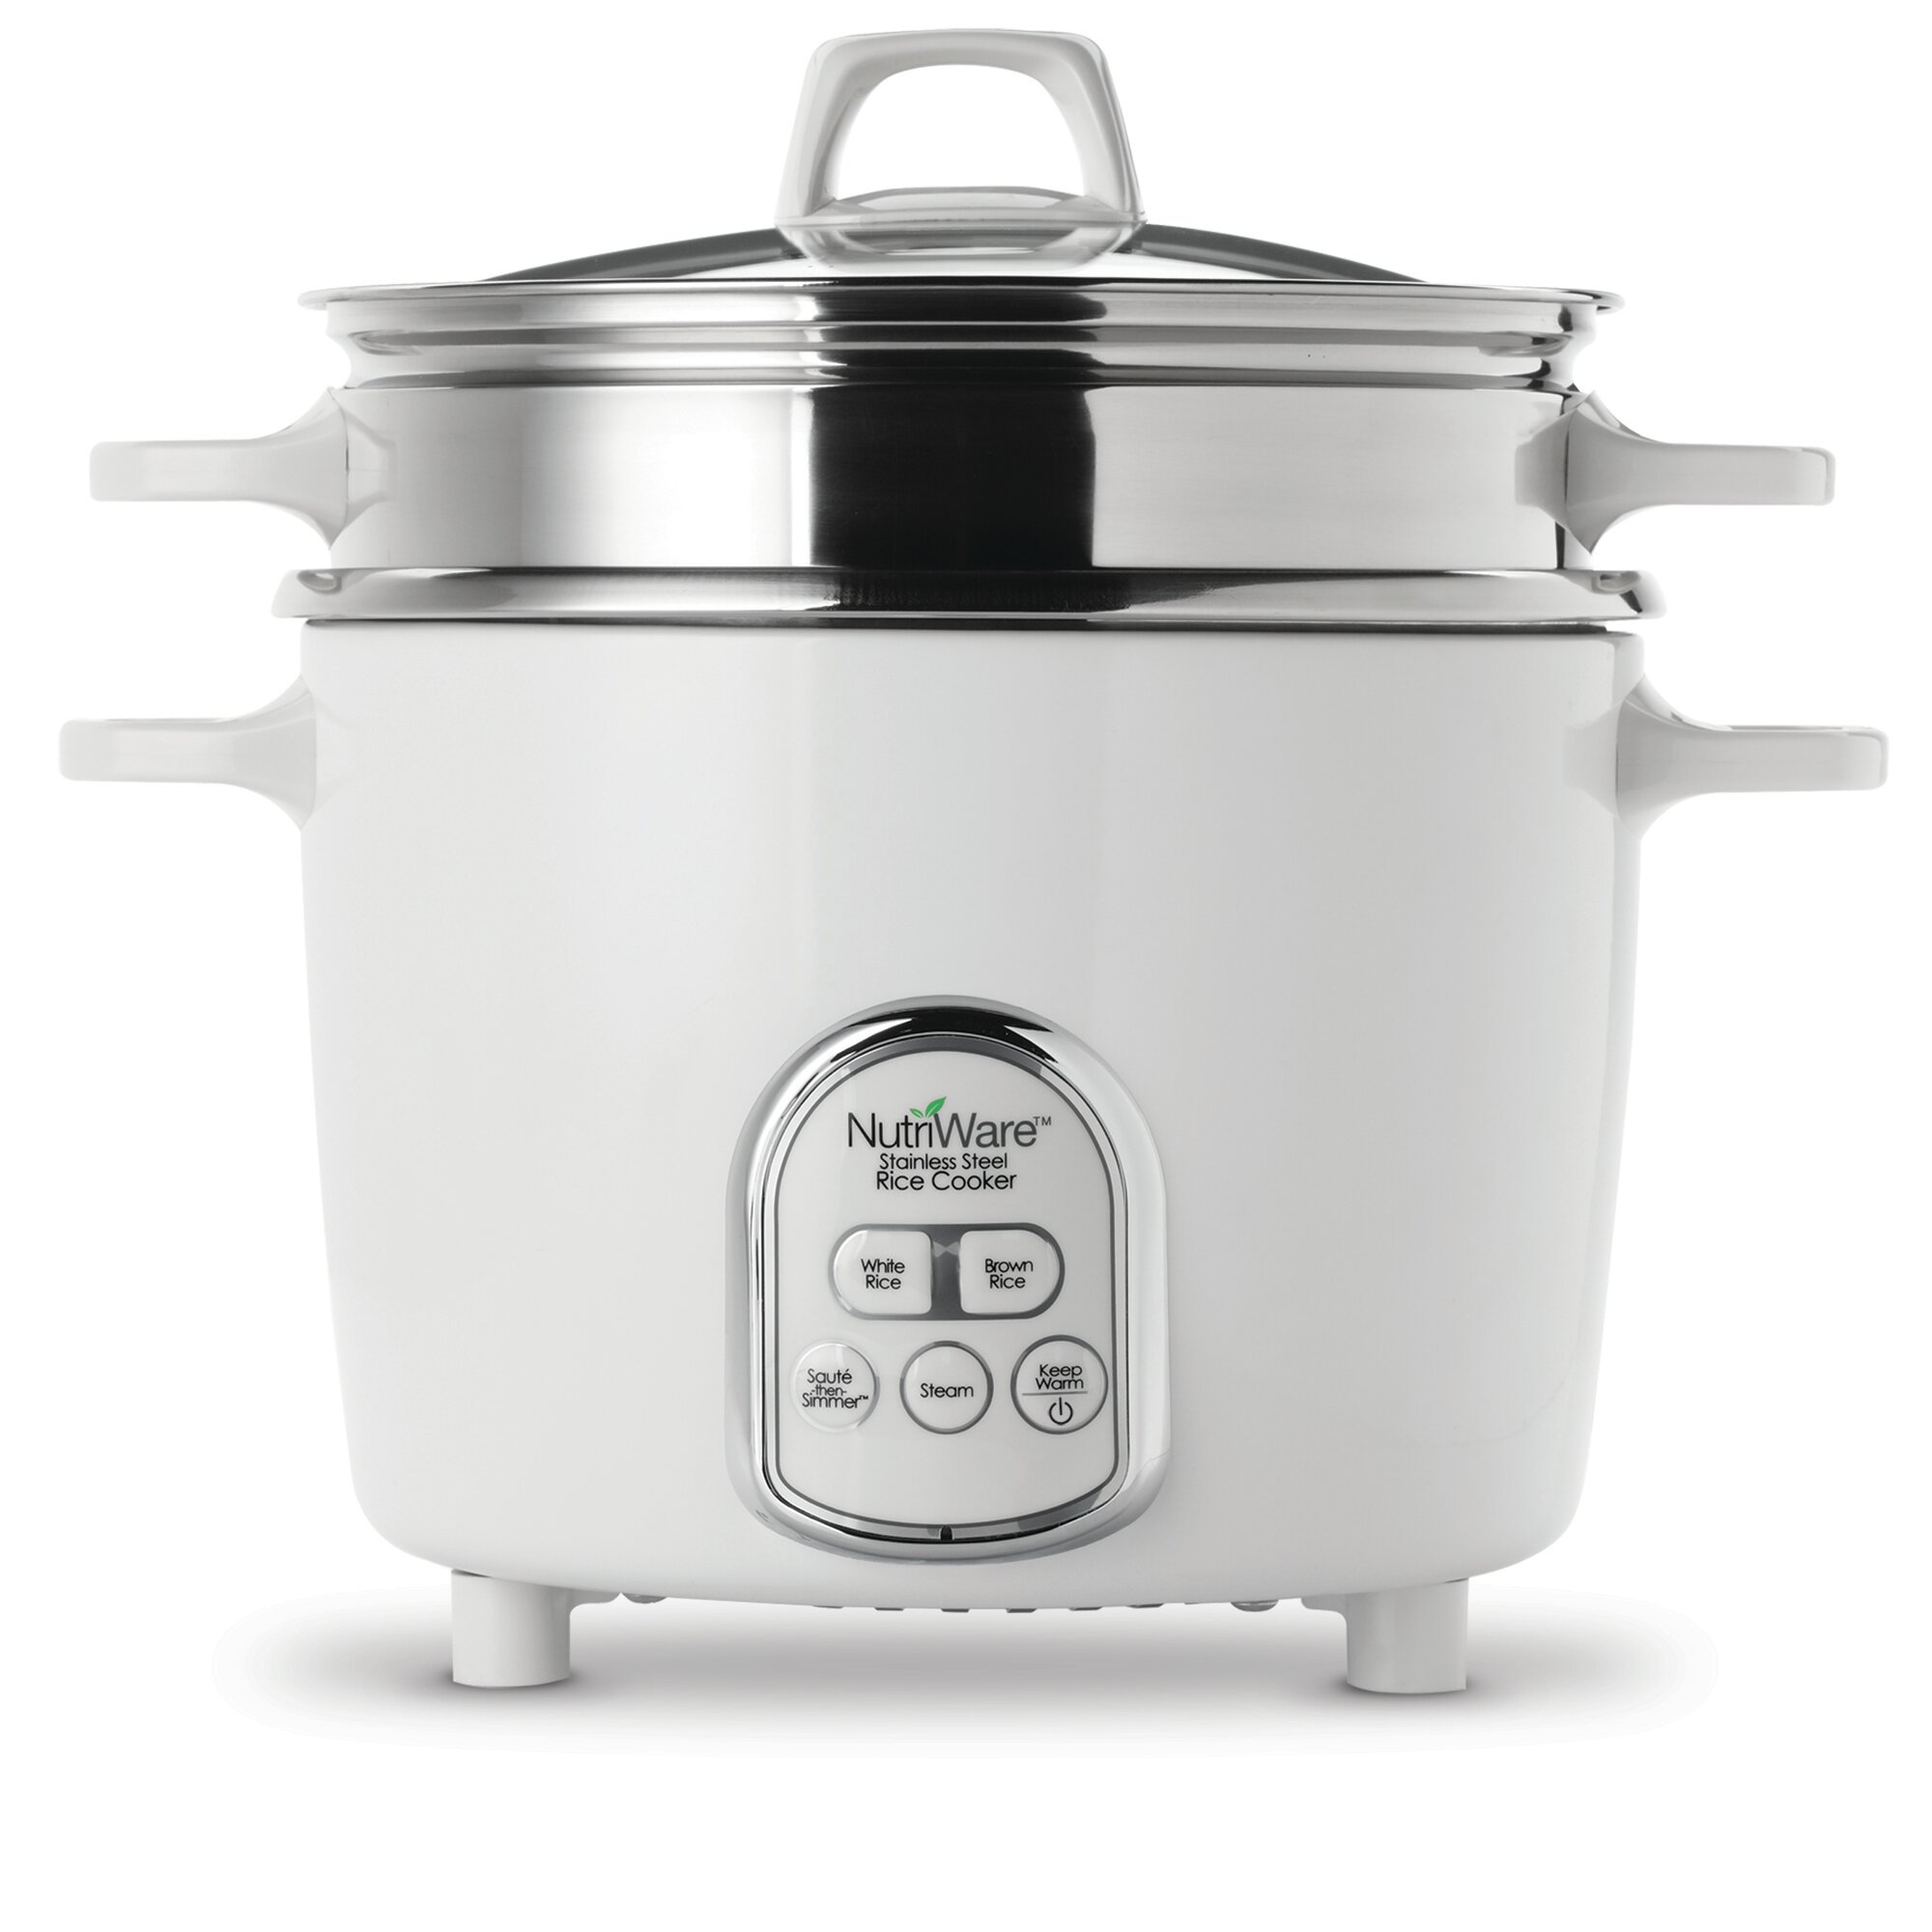 Bear Rice Cooker 3 Cups (Uncooked) $34.99